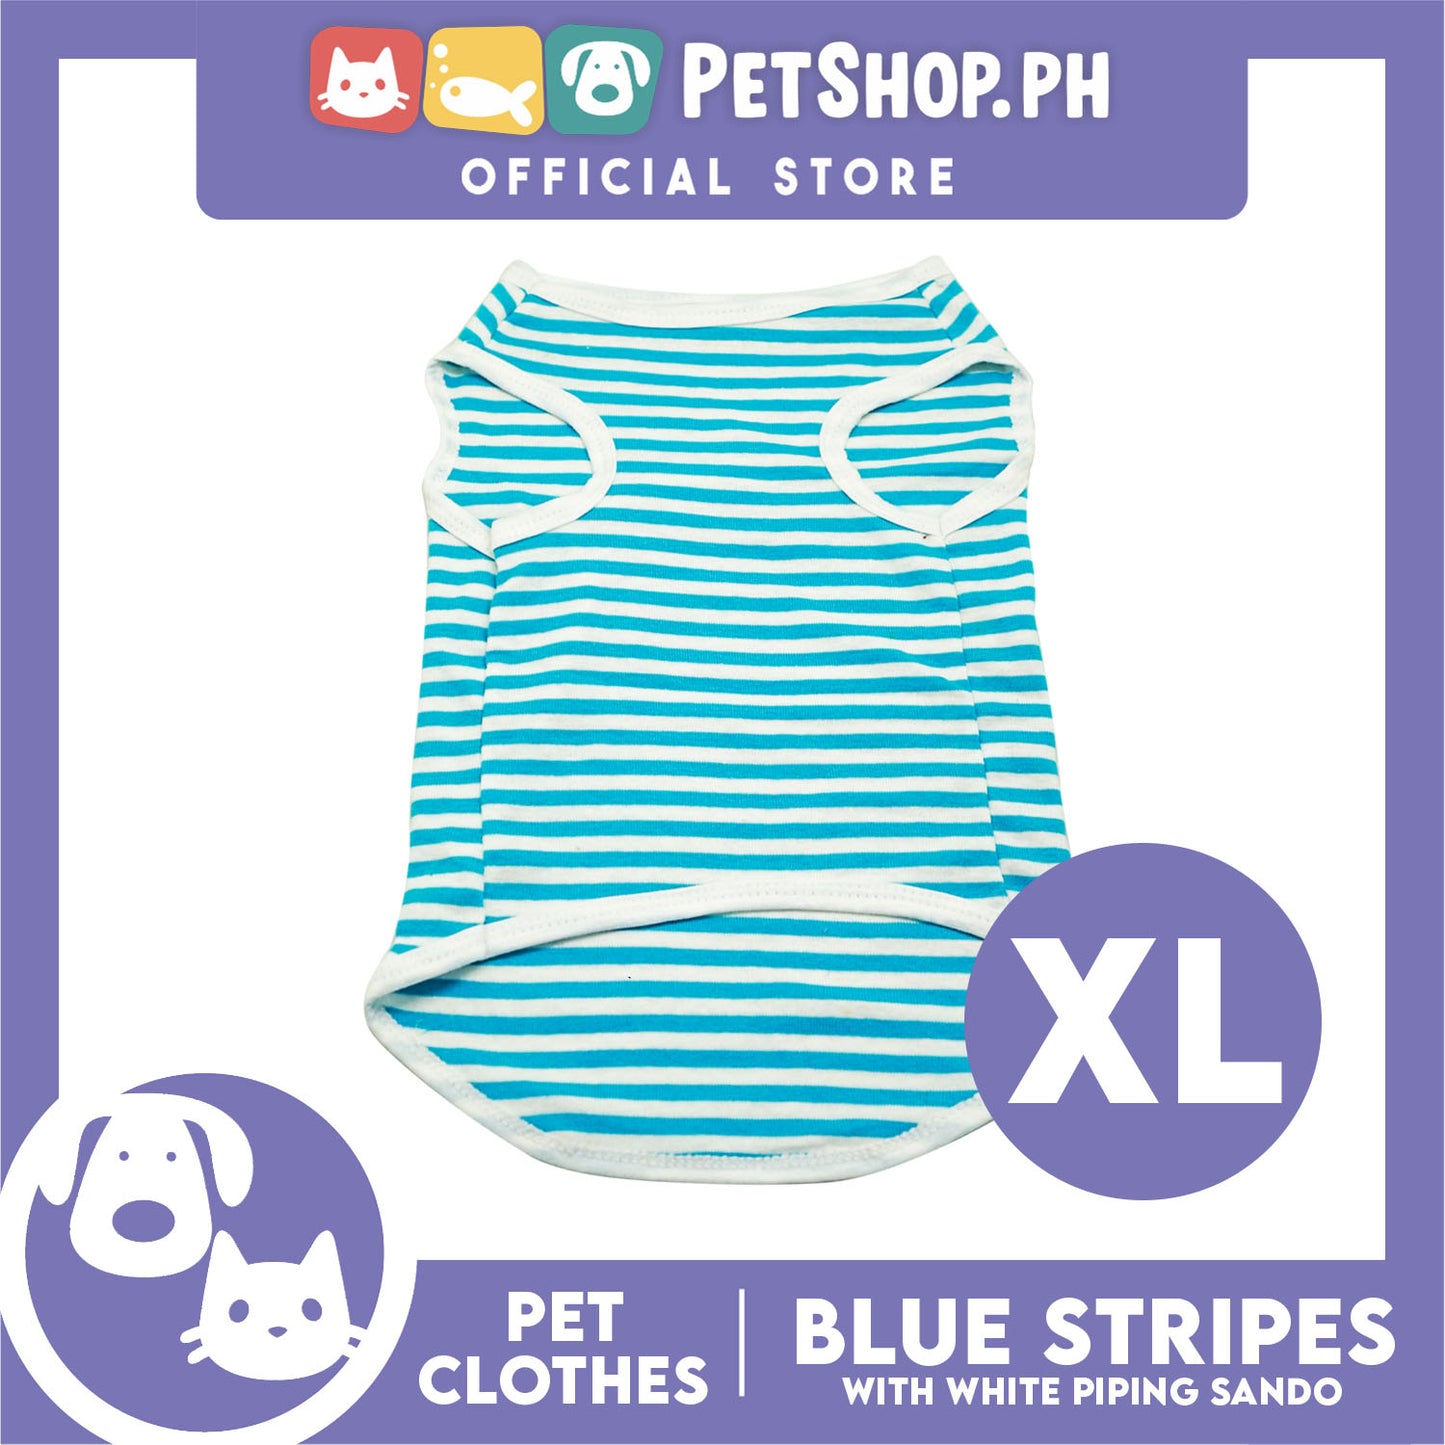 Pet Sando Blue Stripes with White Piping Sando (XL) Summer Shirt for Dogs and Cats